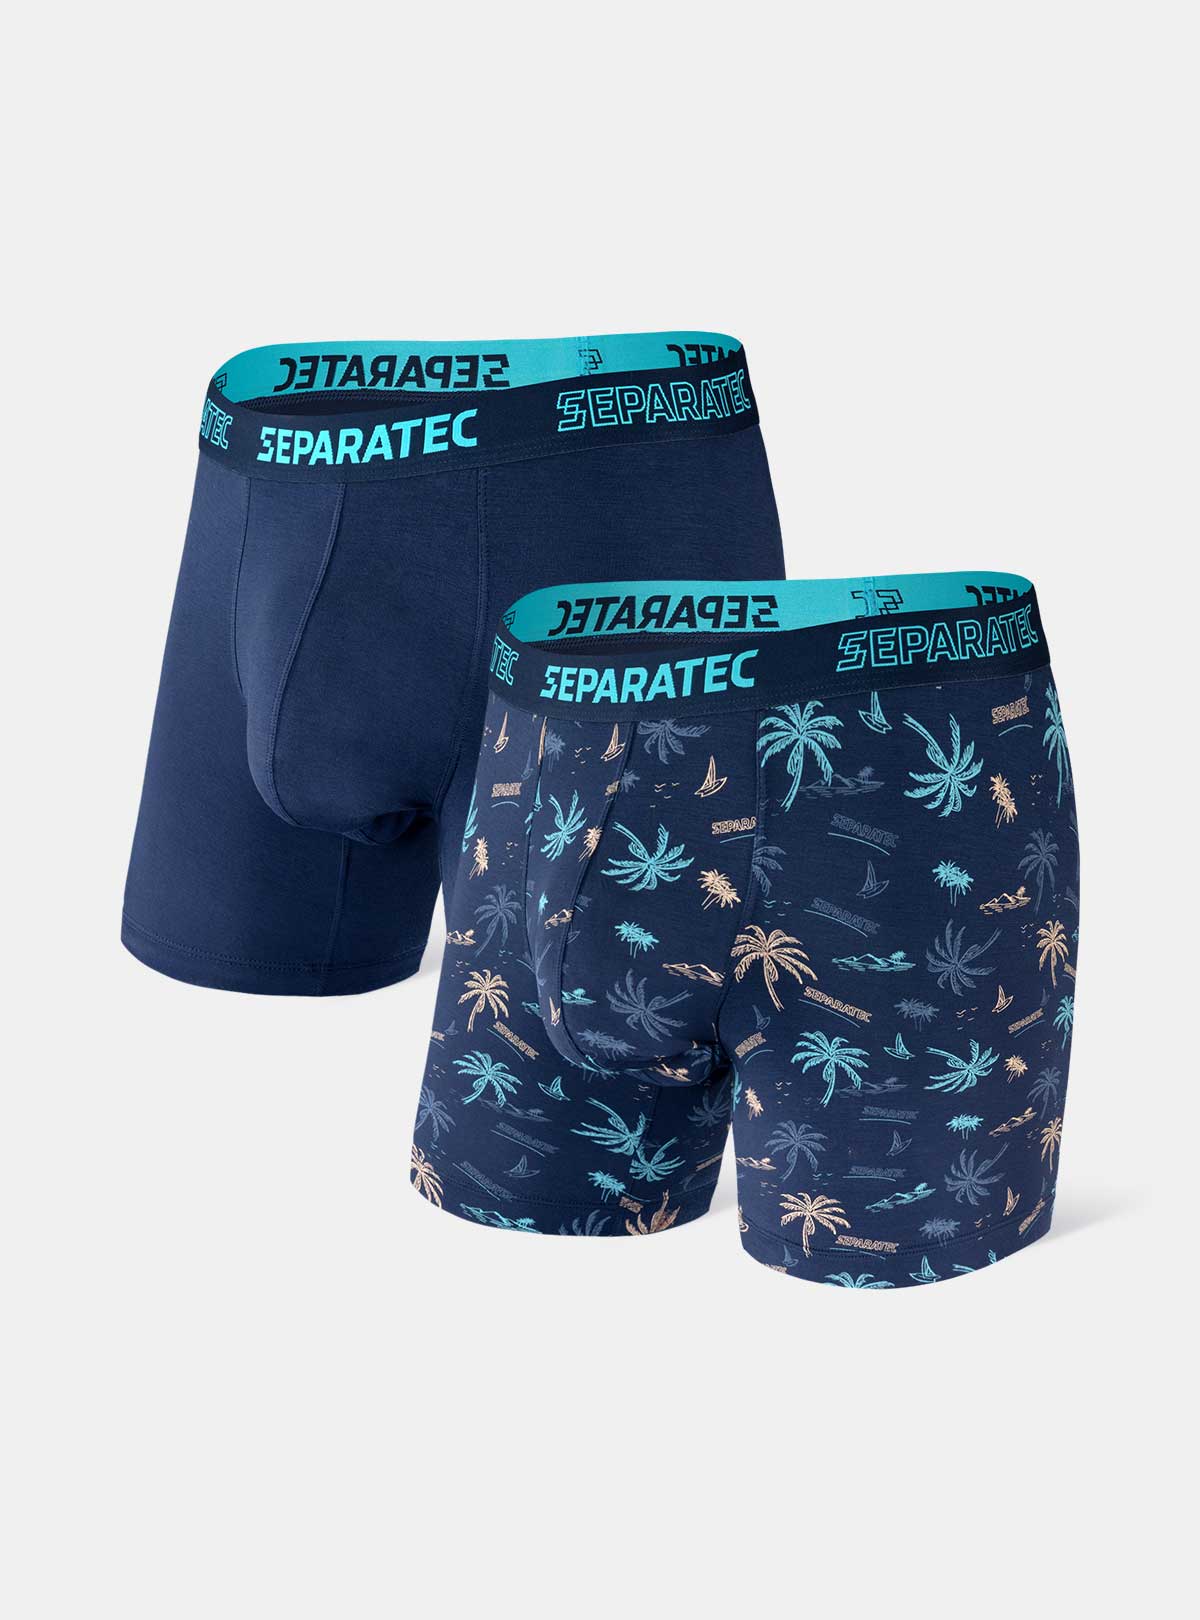 Separatec Underwear - Unleash your vibrant style with Separatec Colorful  Waistband Everyday Boxer Briefs. Embrace the colorful comfort and make a  statement of confidence. 🏊‍♀️ 🩲 #separatec  #underwear #fashion #comfortable #fyp